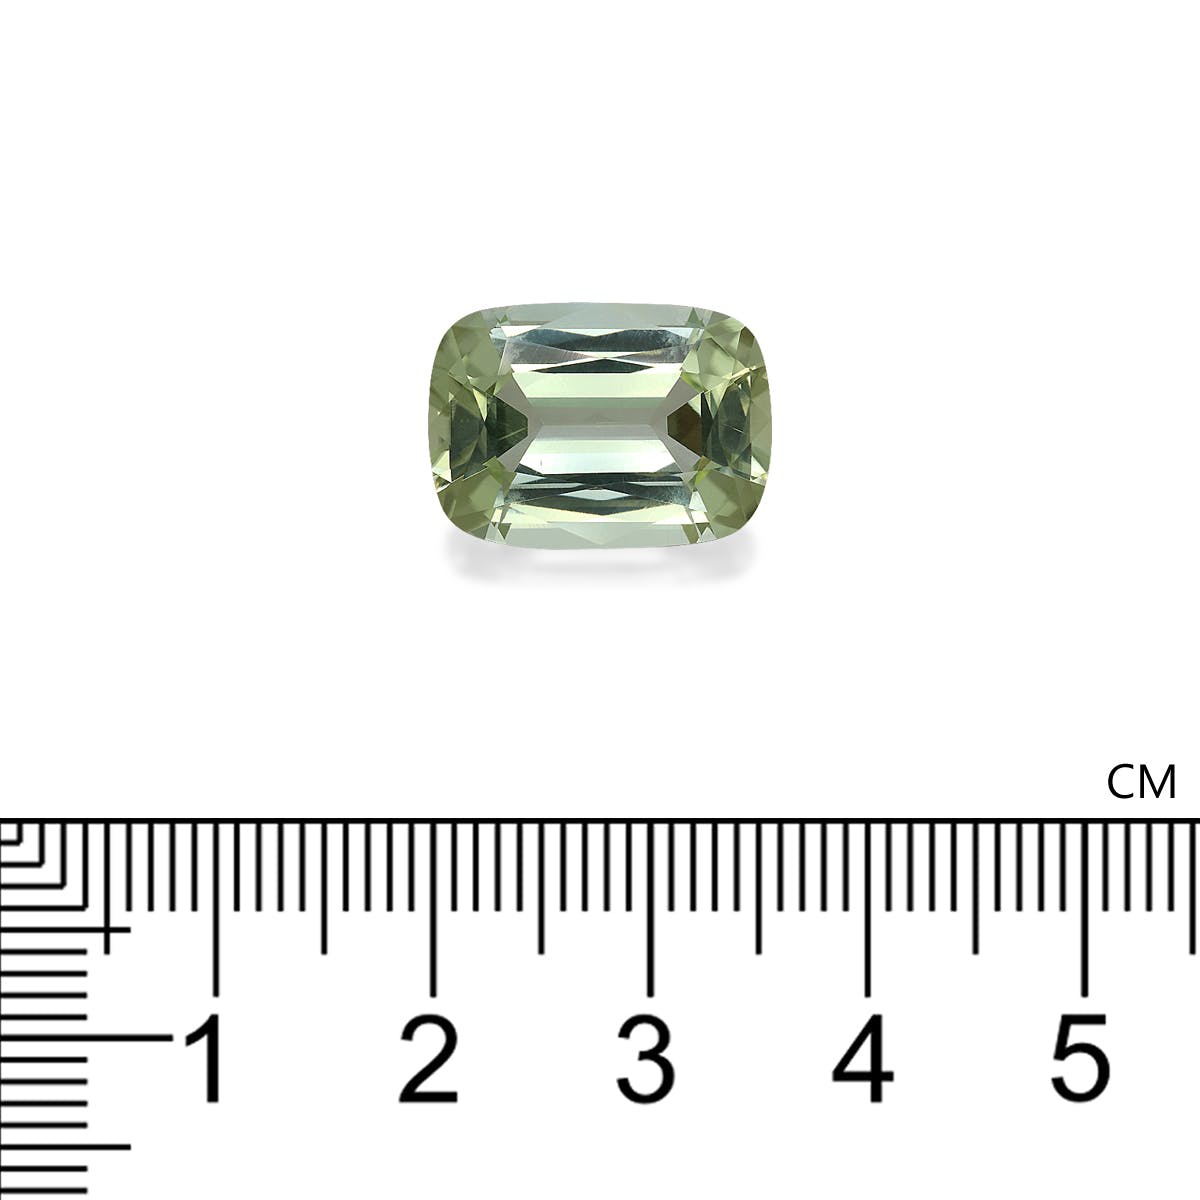 Picture of Mist Green Tourmaline 9.45ct (TG0454)